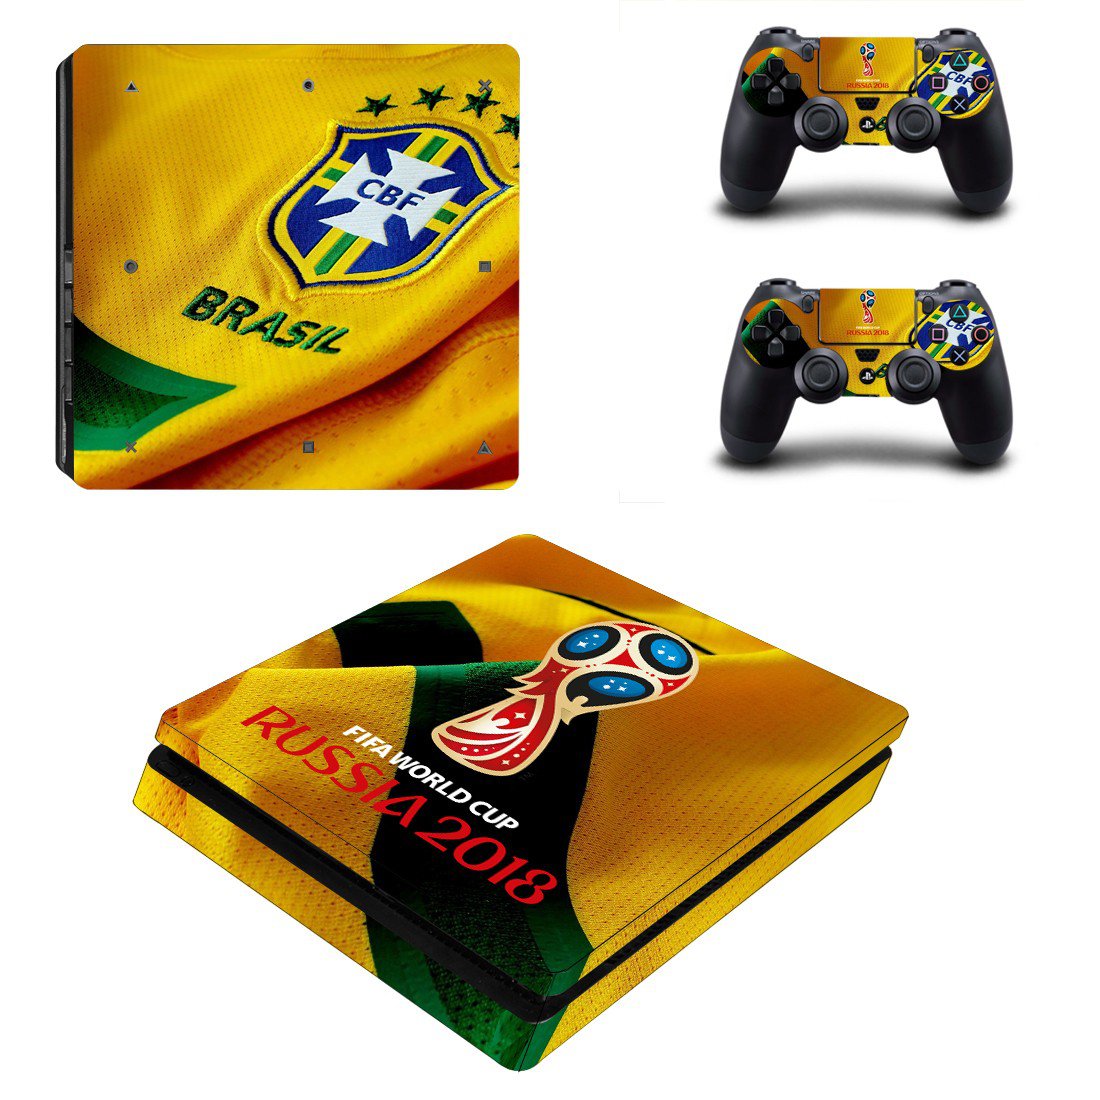 2018 FIFA World Cup Brazil Cover For PS4 Slim